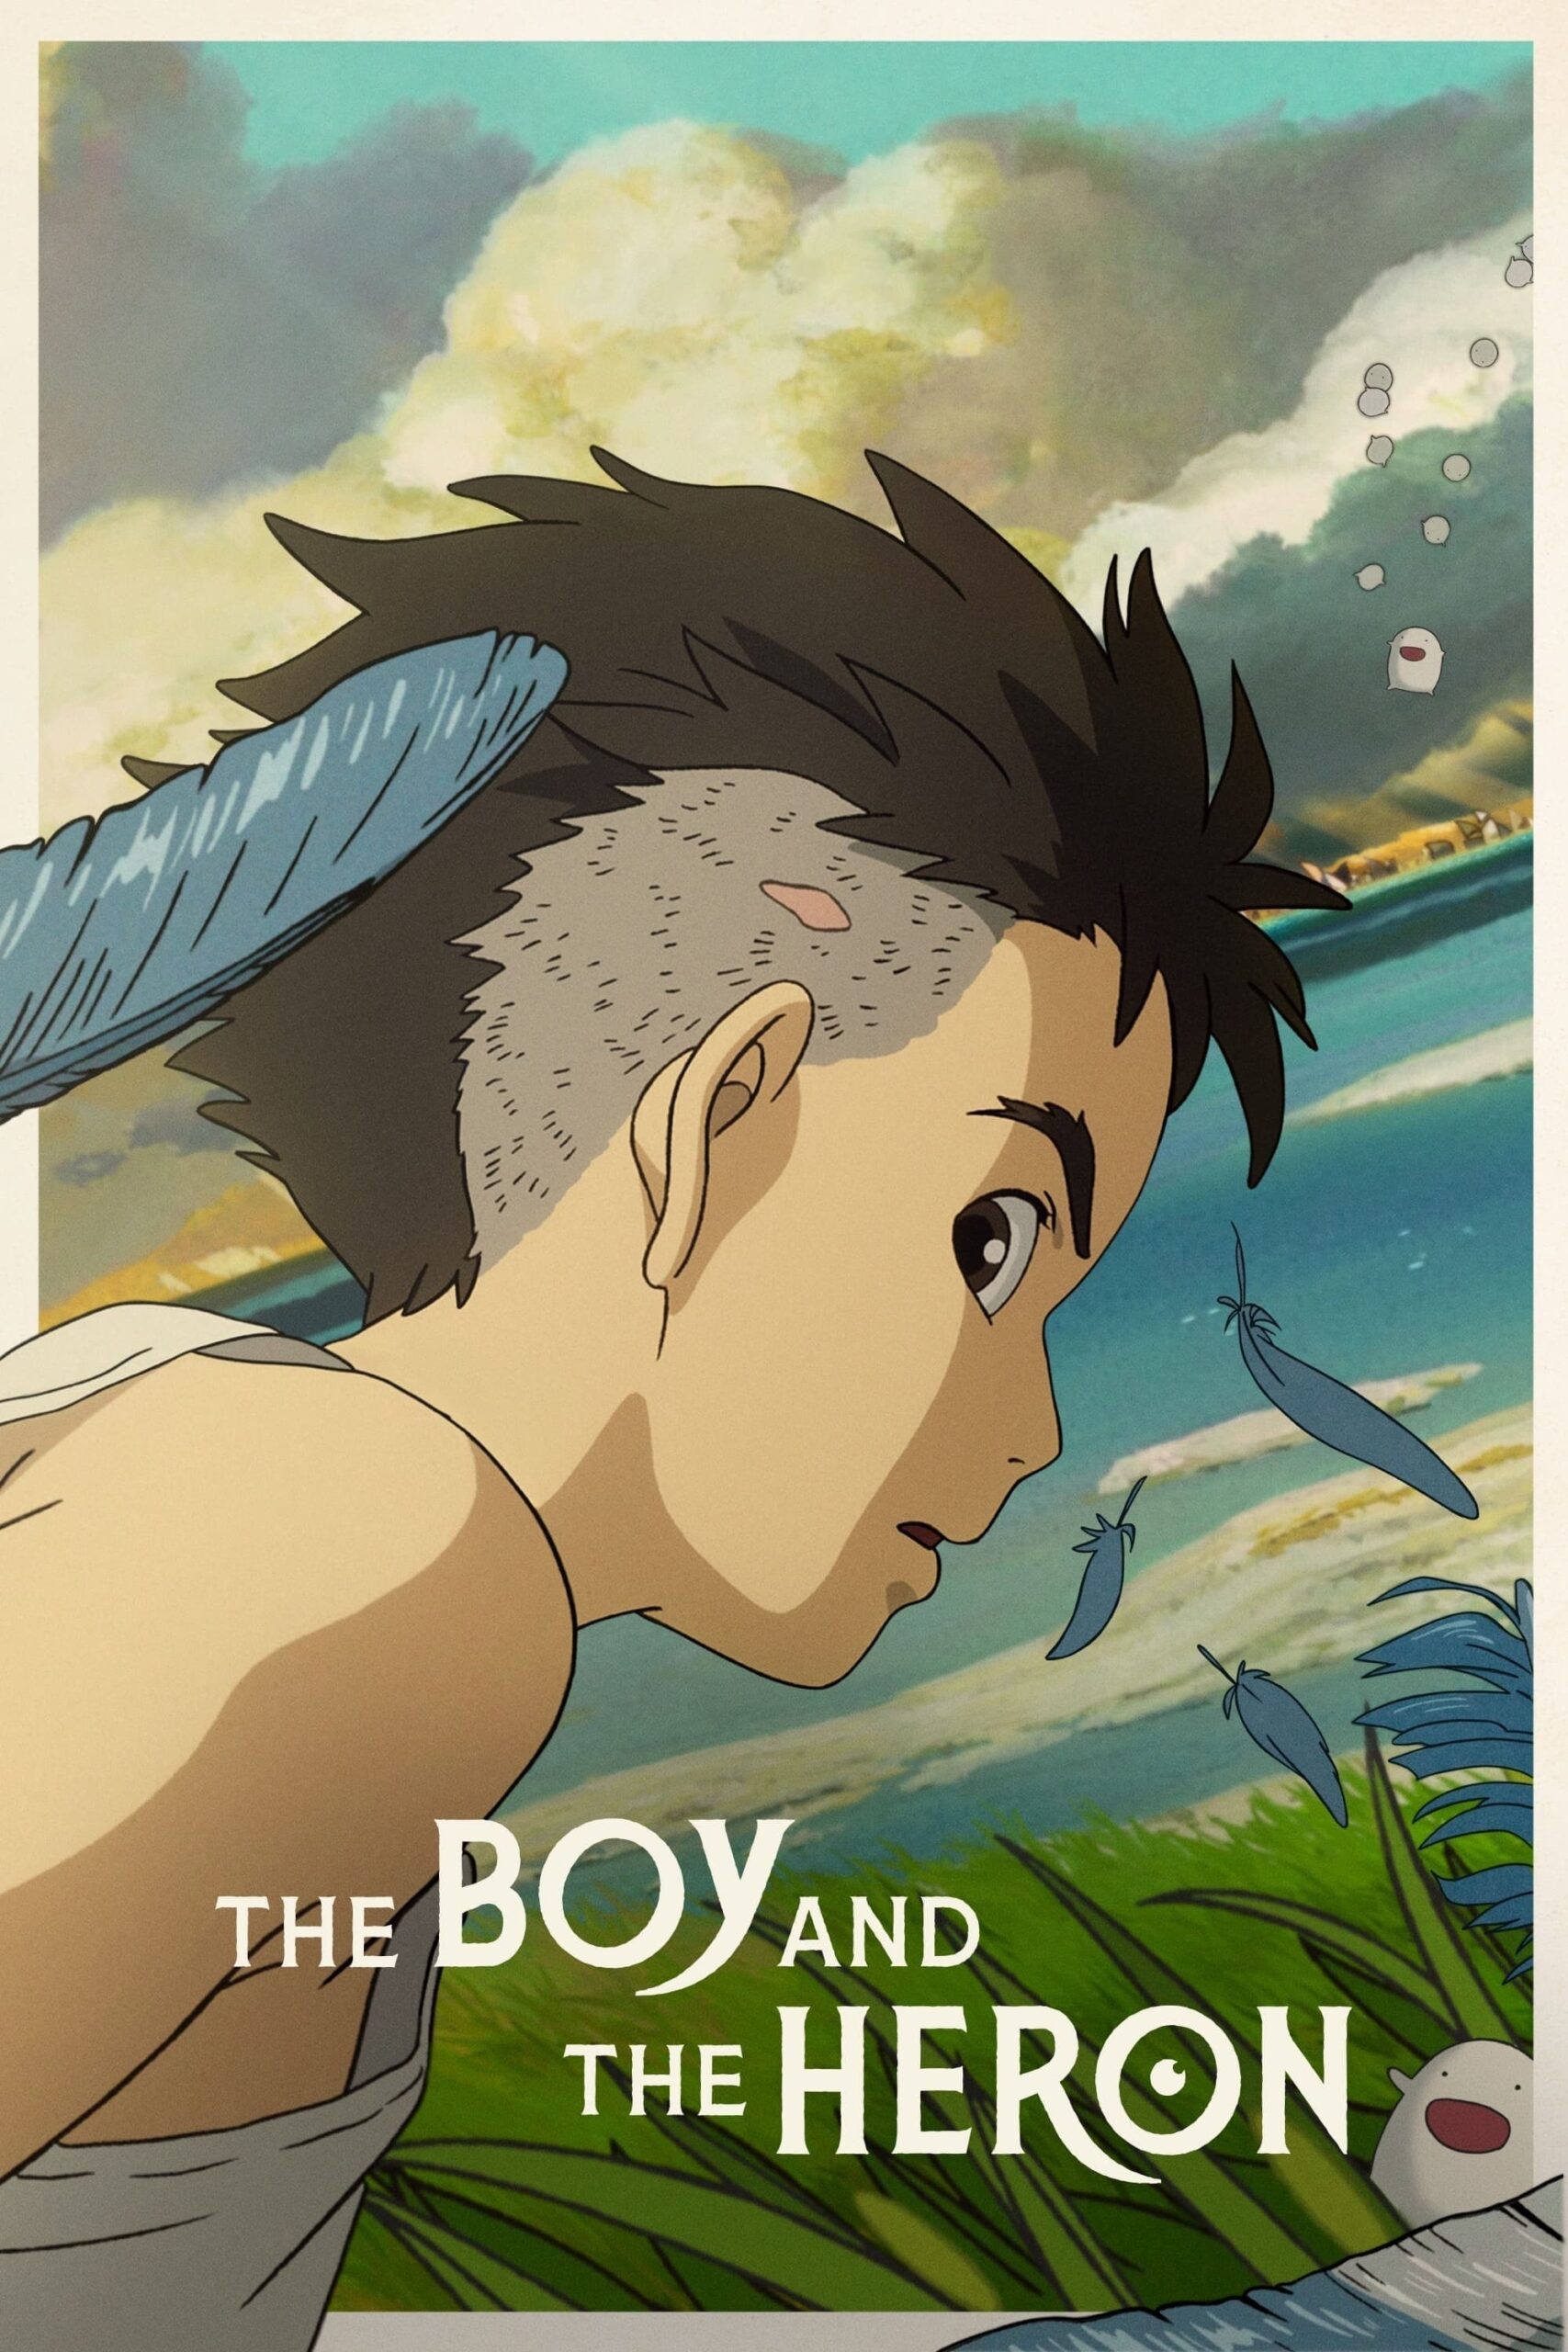 Poster for "The Boy and the Heron"